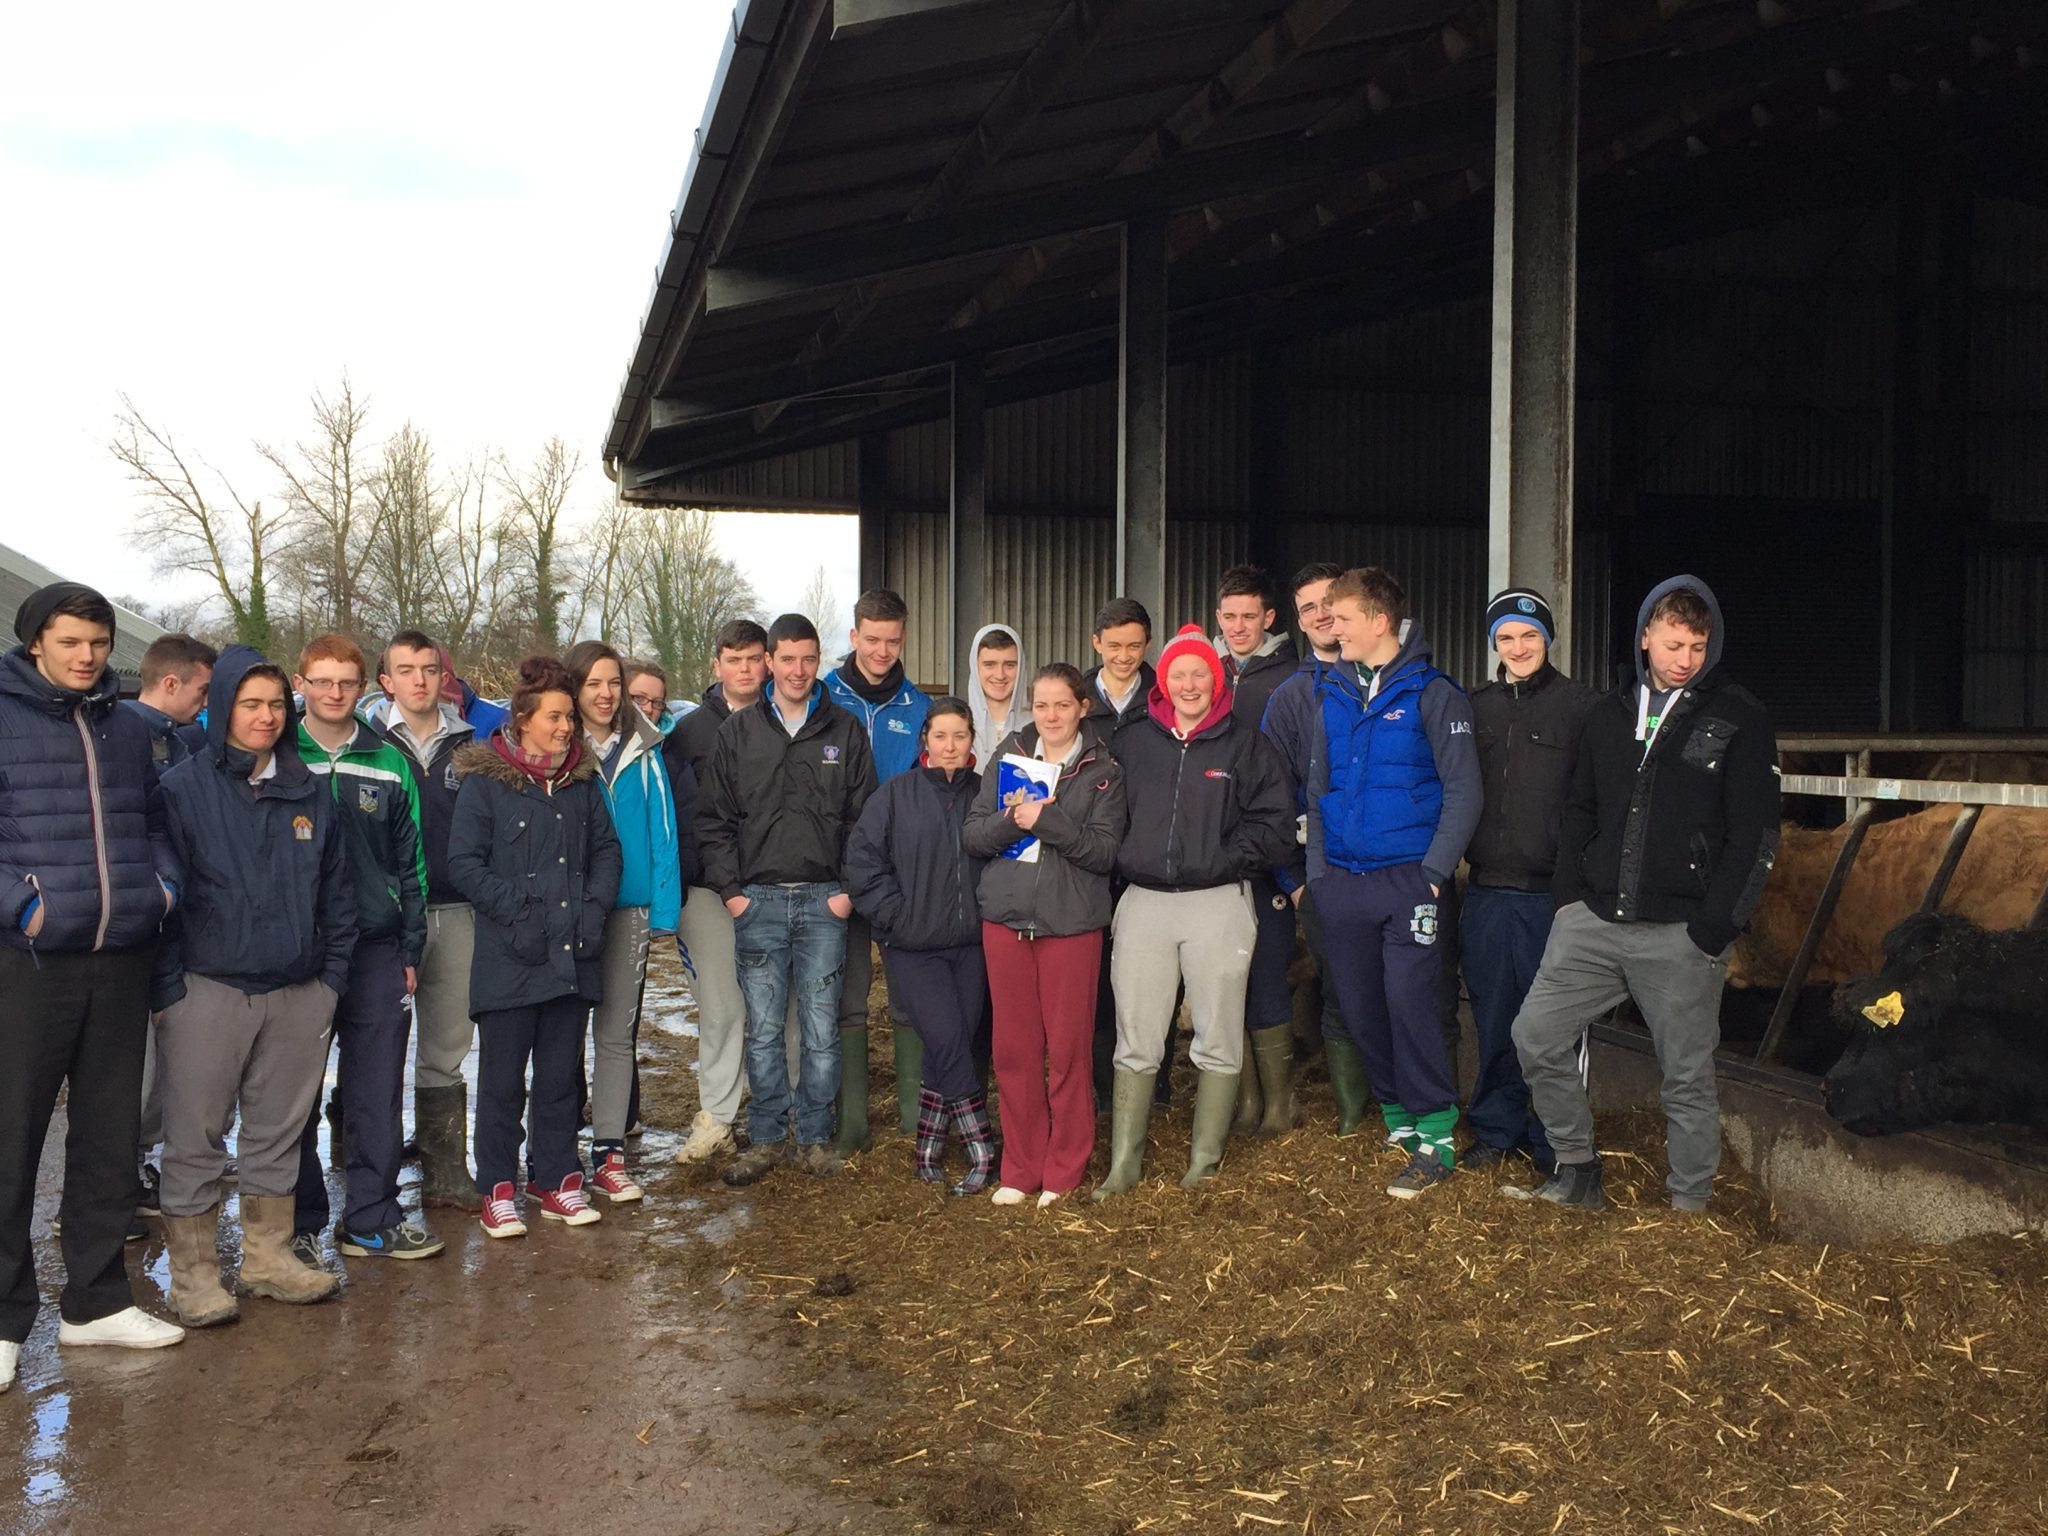 6th Year Pupils of Desmond College on a farm walk at Pallaskenry Agricultural College